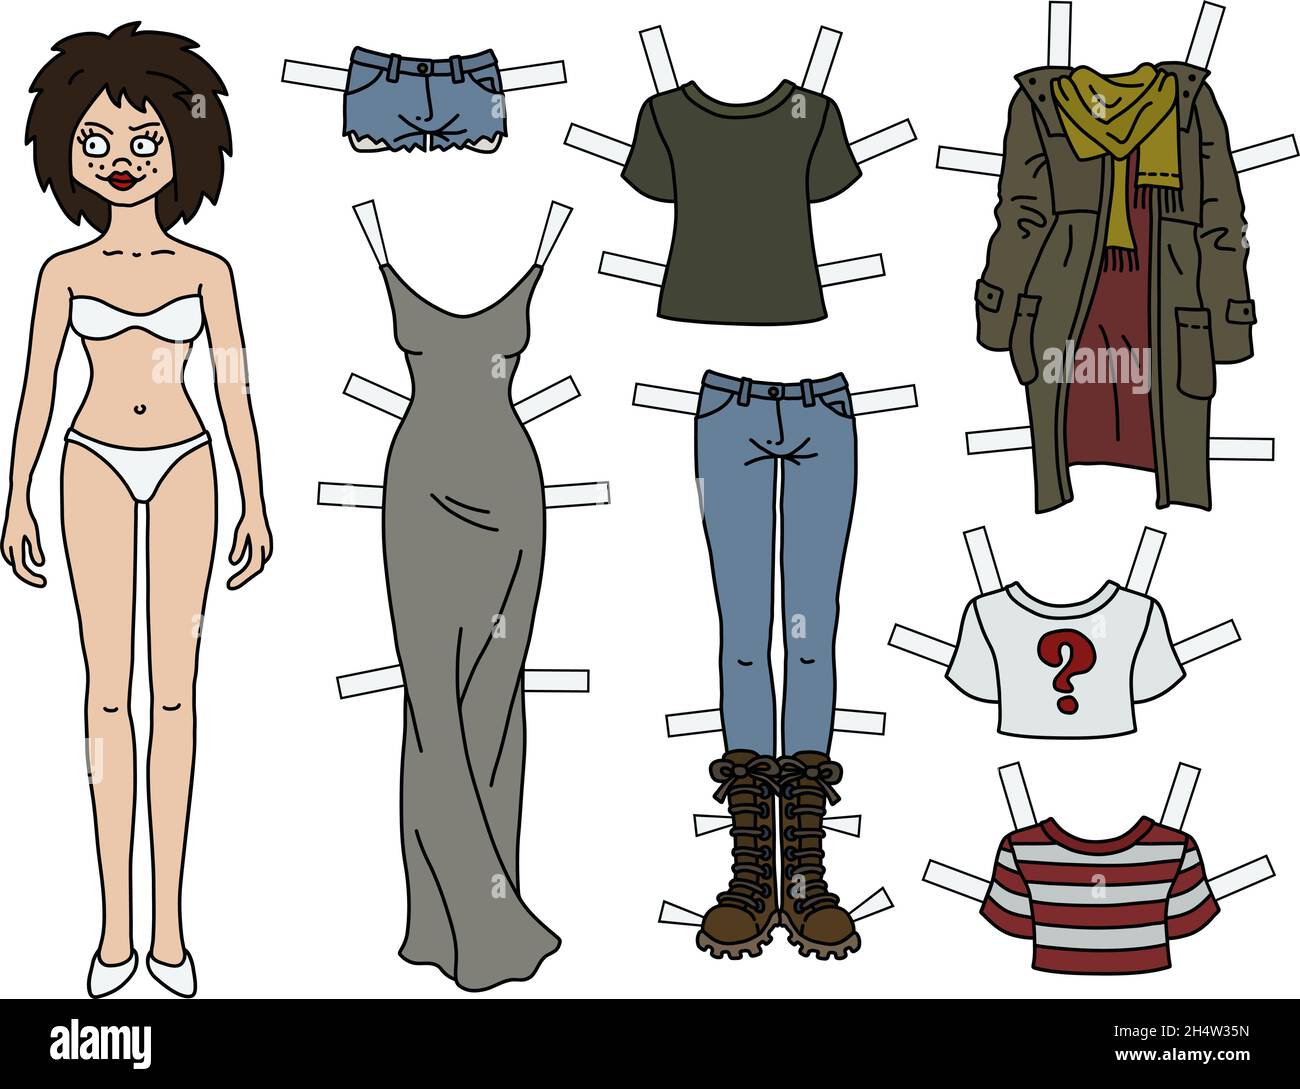 https://c8.alamy.com/comp/2H4W35N/the-brunette-paper-doll-with-cutout-clothes-2H4W35N.jpg